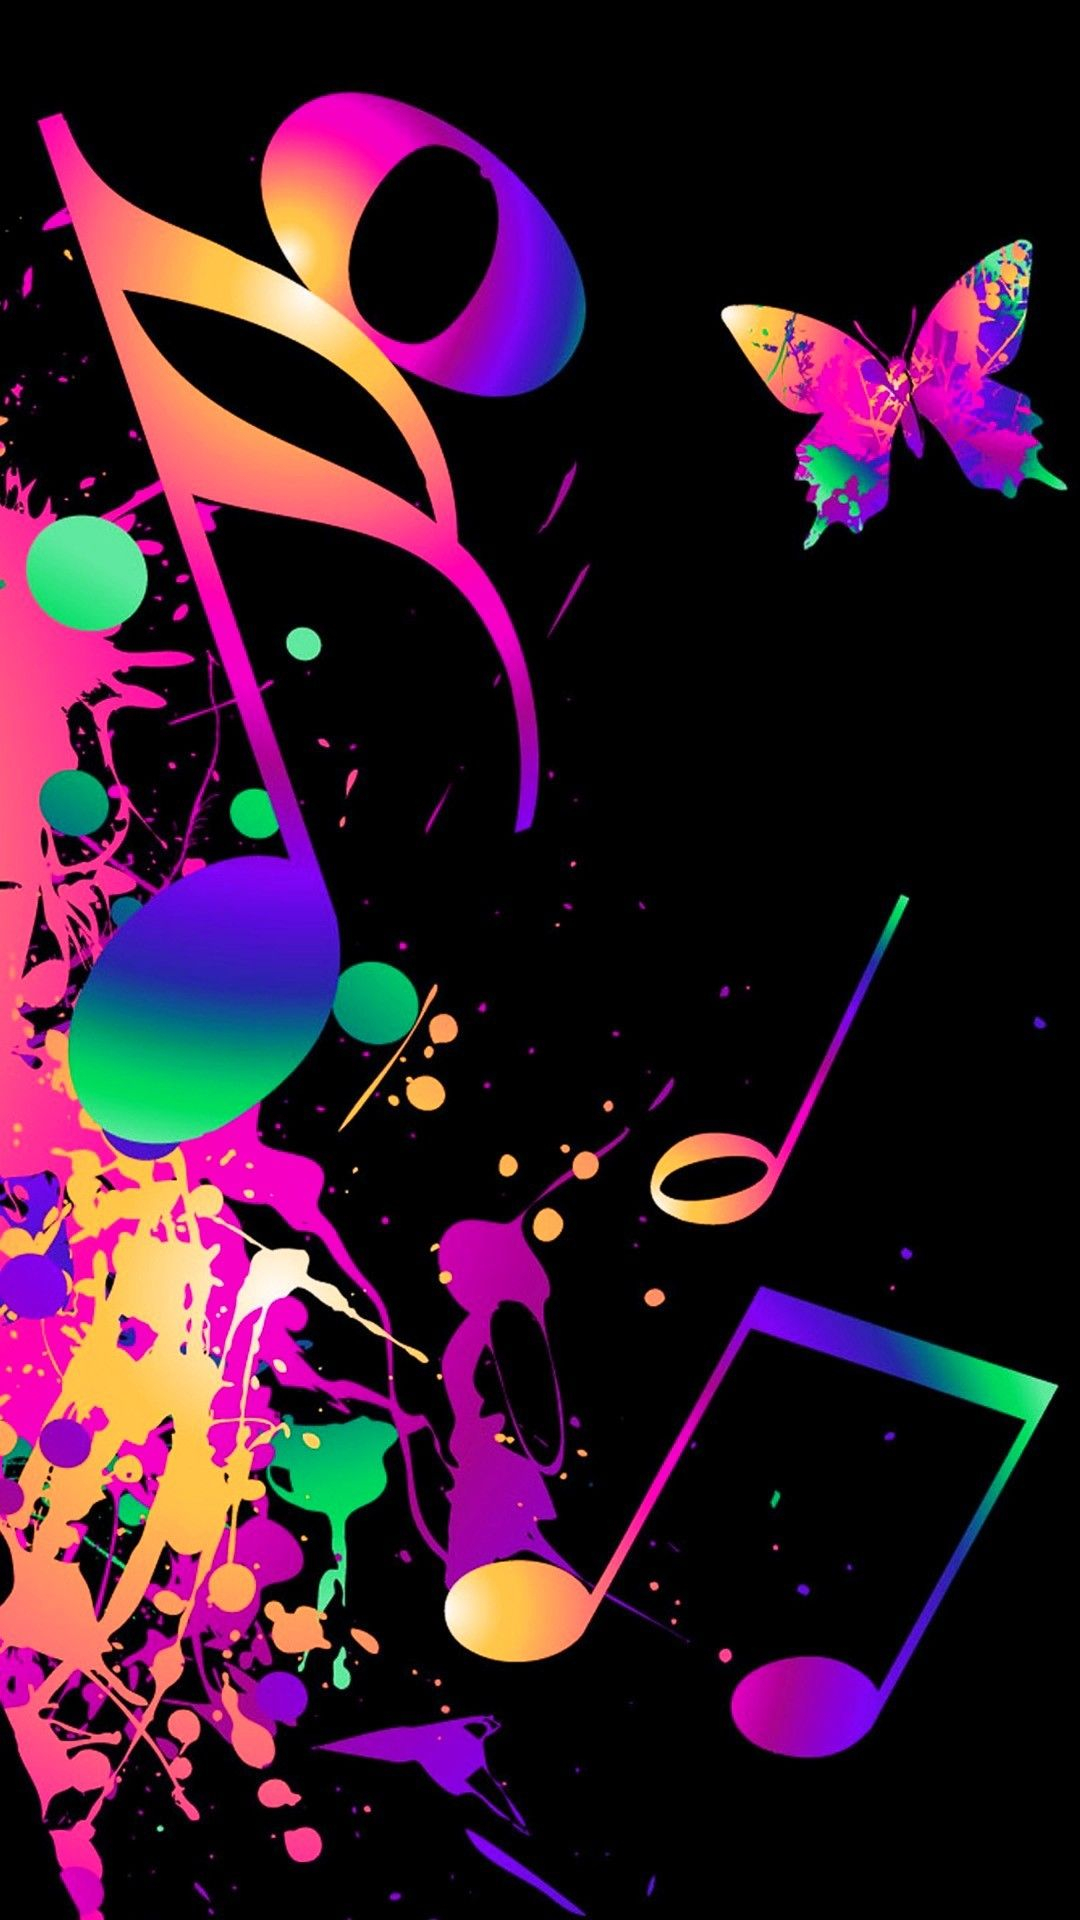 1080x1920 Ooo the colors! Maybe something for a | Music wallpaper, Music artwork, Galaxy wallpaper